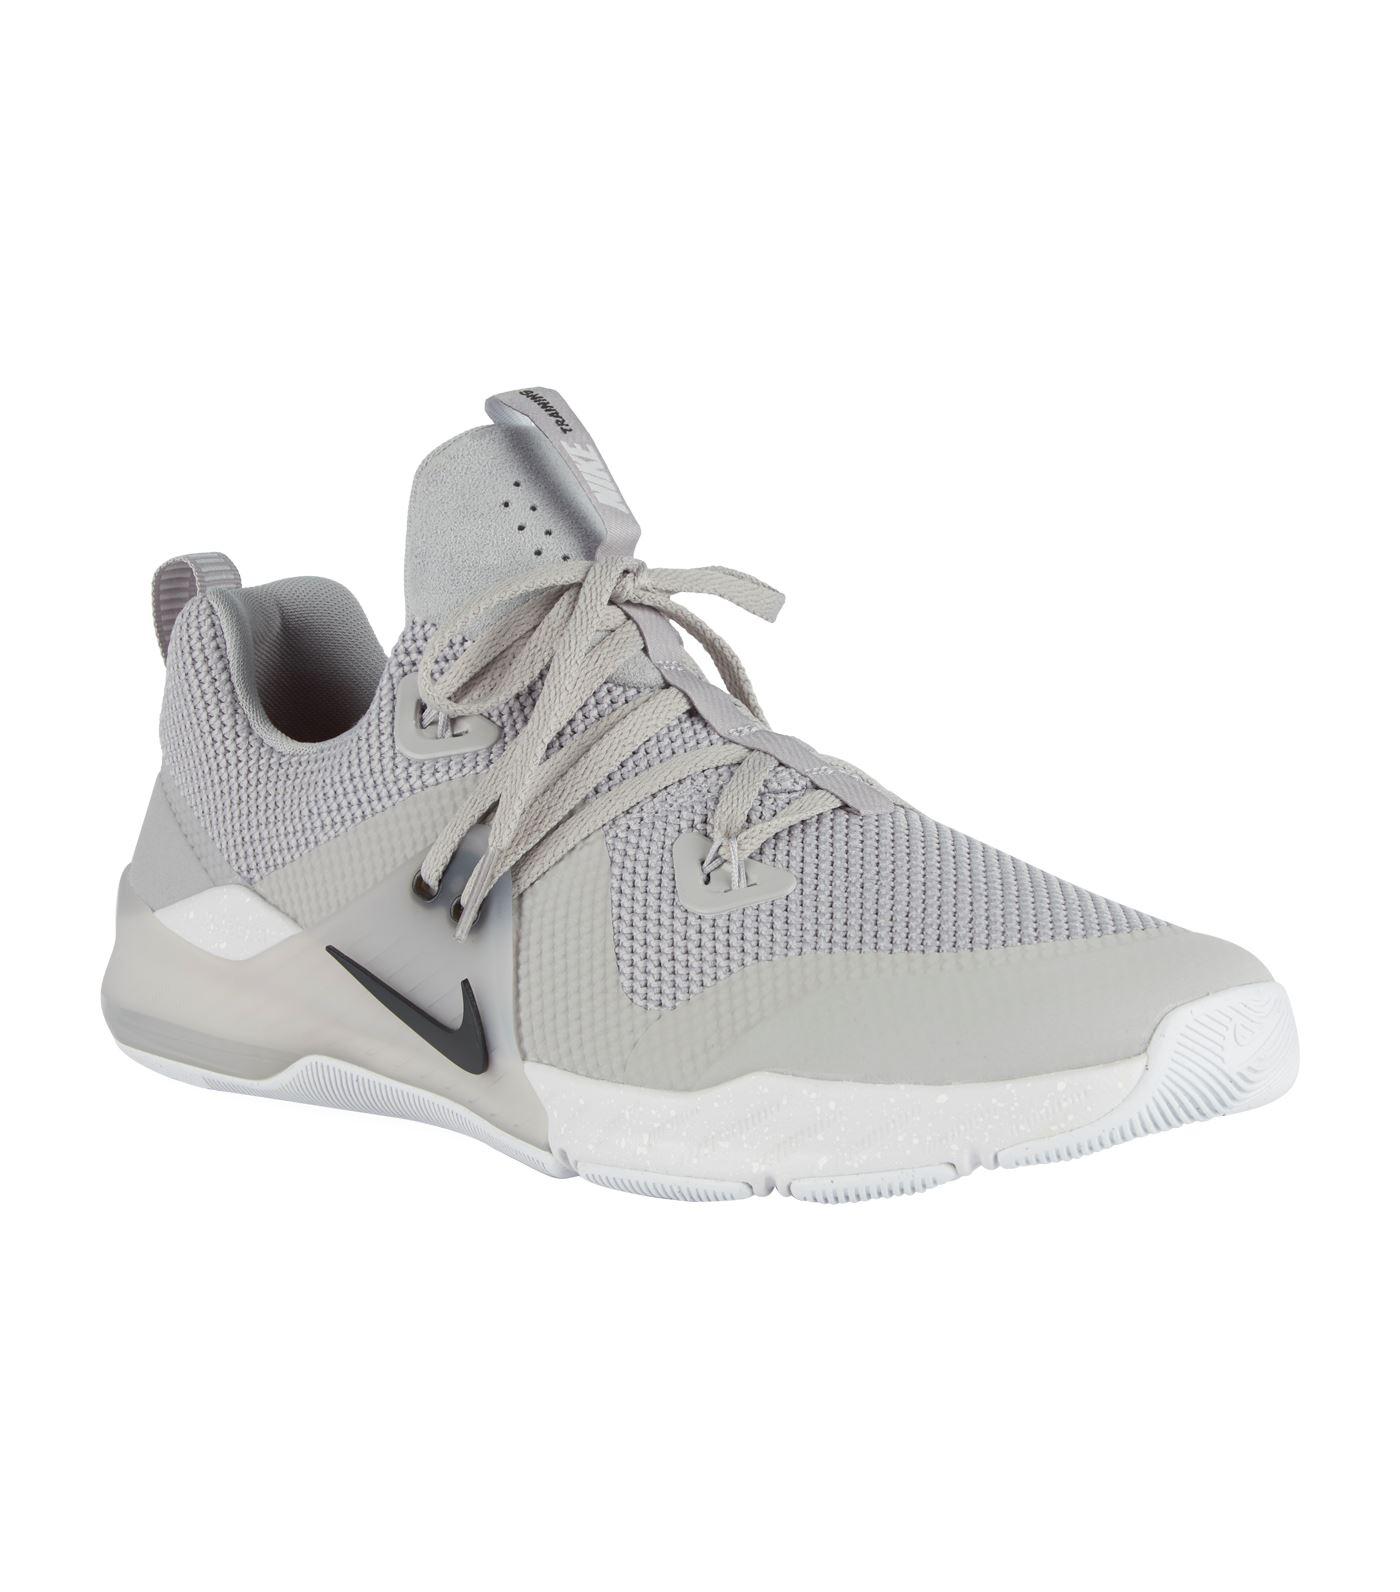 Nike Zoom Train Command Grey Top Sellers, SAVE 36% - www.ecomedica.med.ec